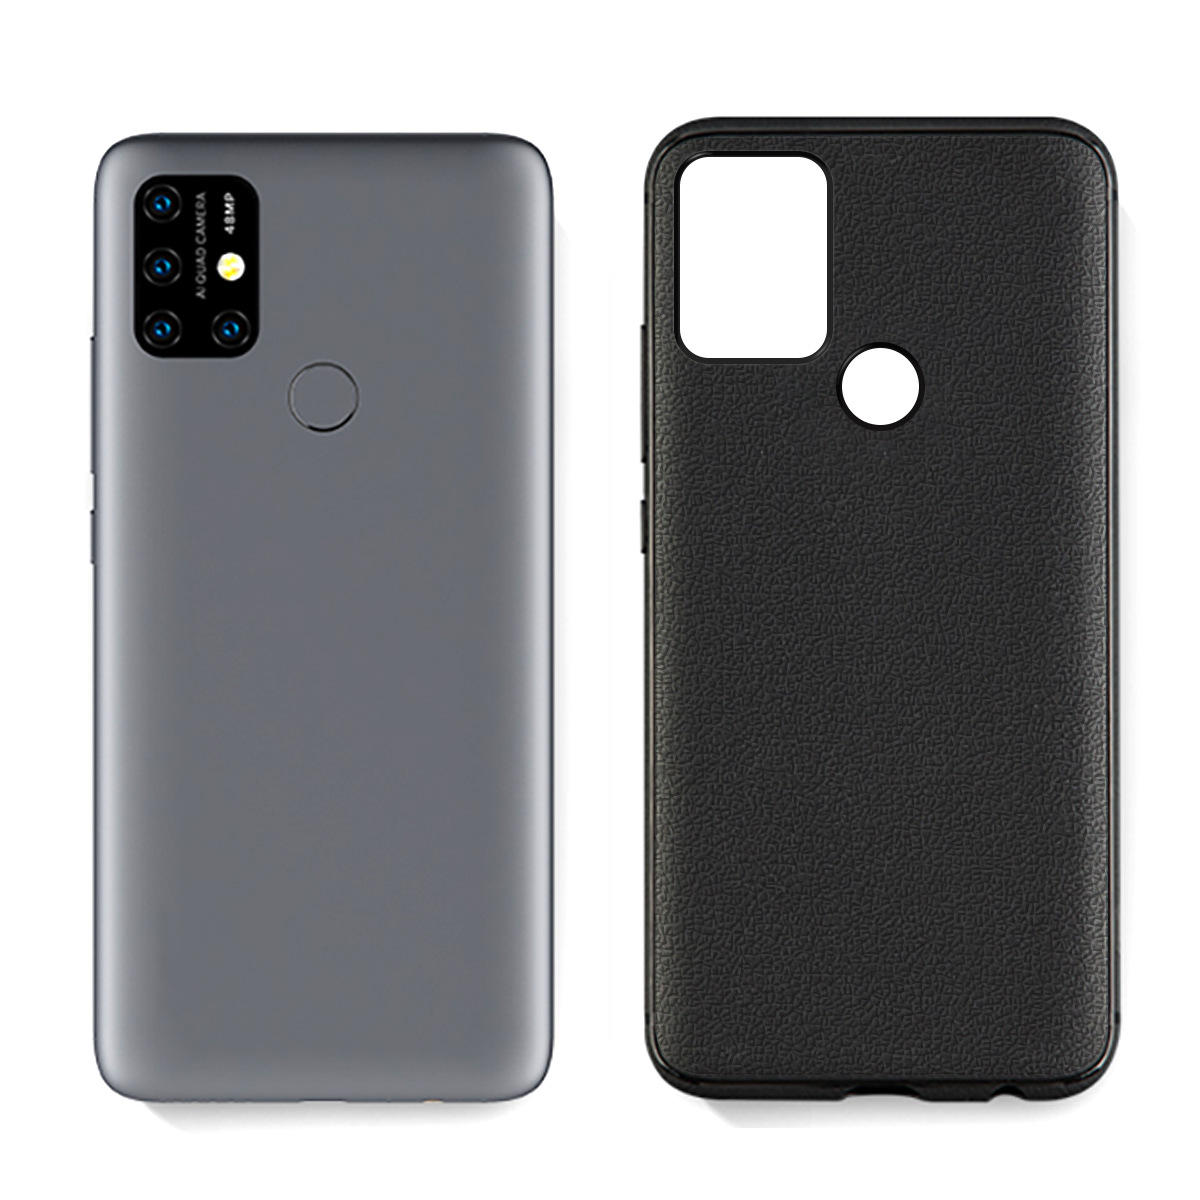 Bakeey Anti-Scratch Soft Silicone Protective Case For Umidigi Power 3